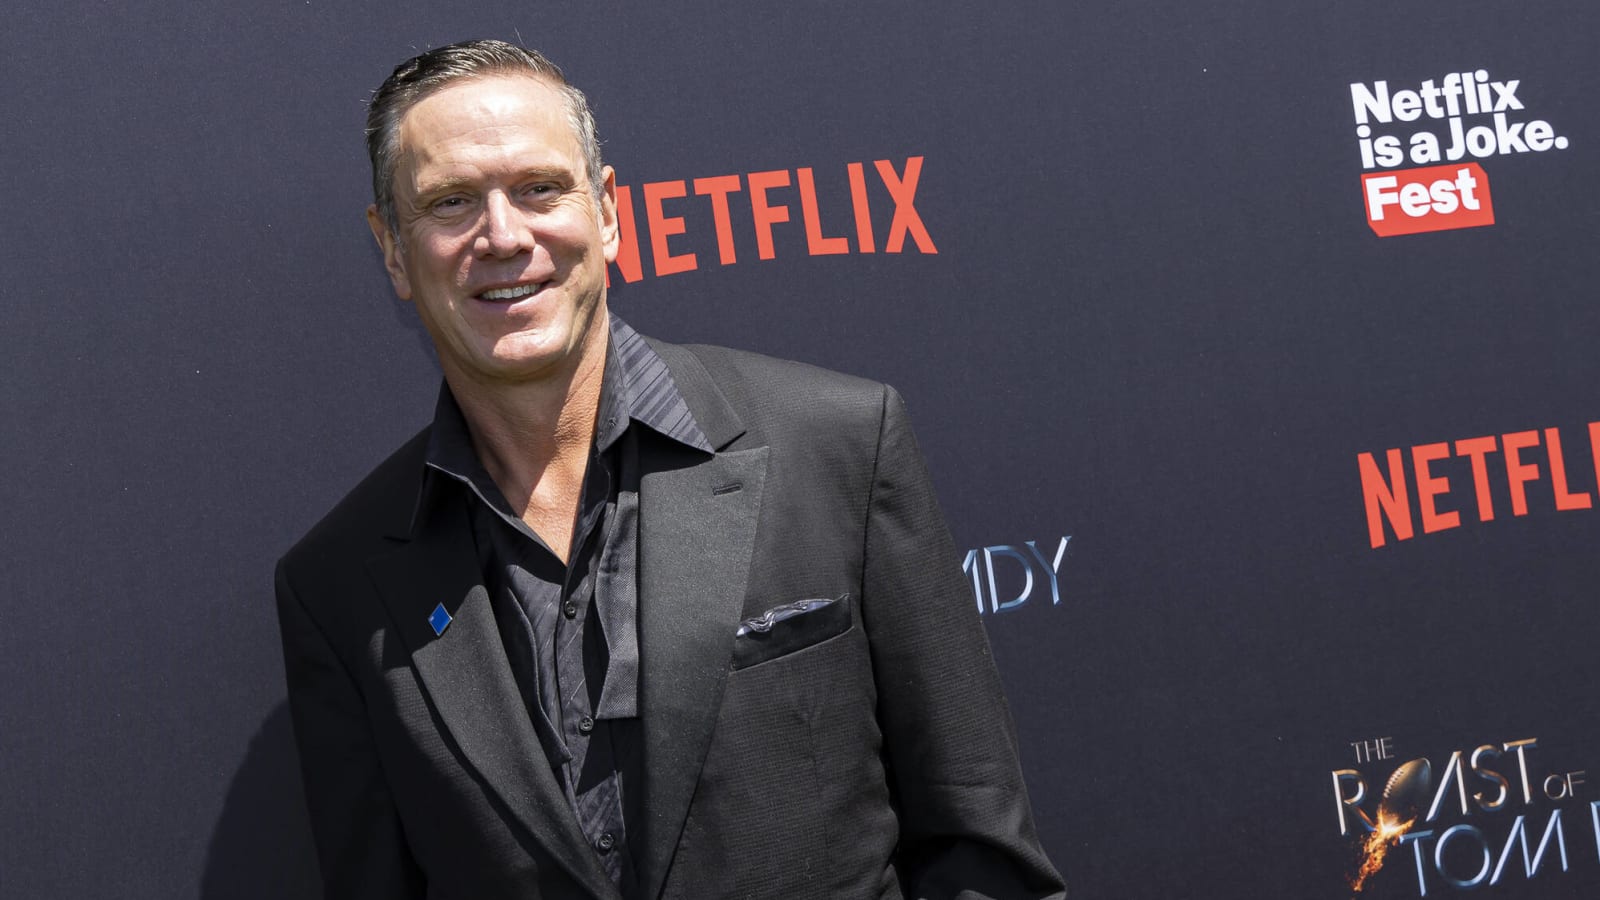 Drew Bledsoe reveals that Netflix paid him to appear at Tom Brady's roast